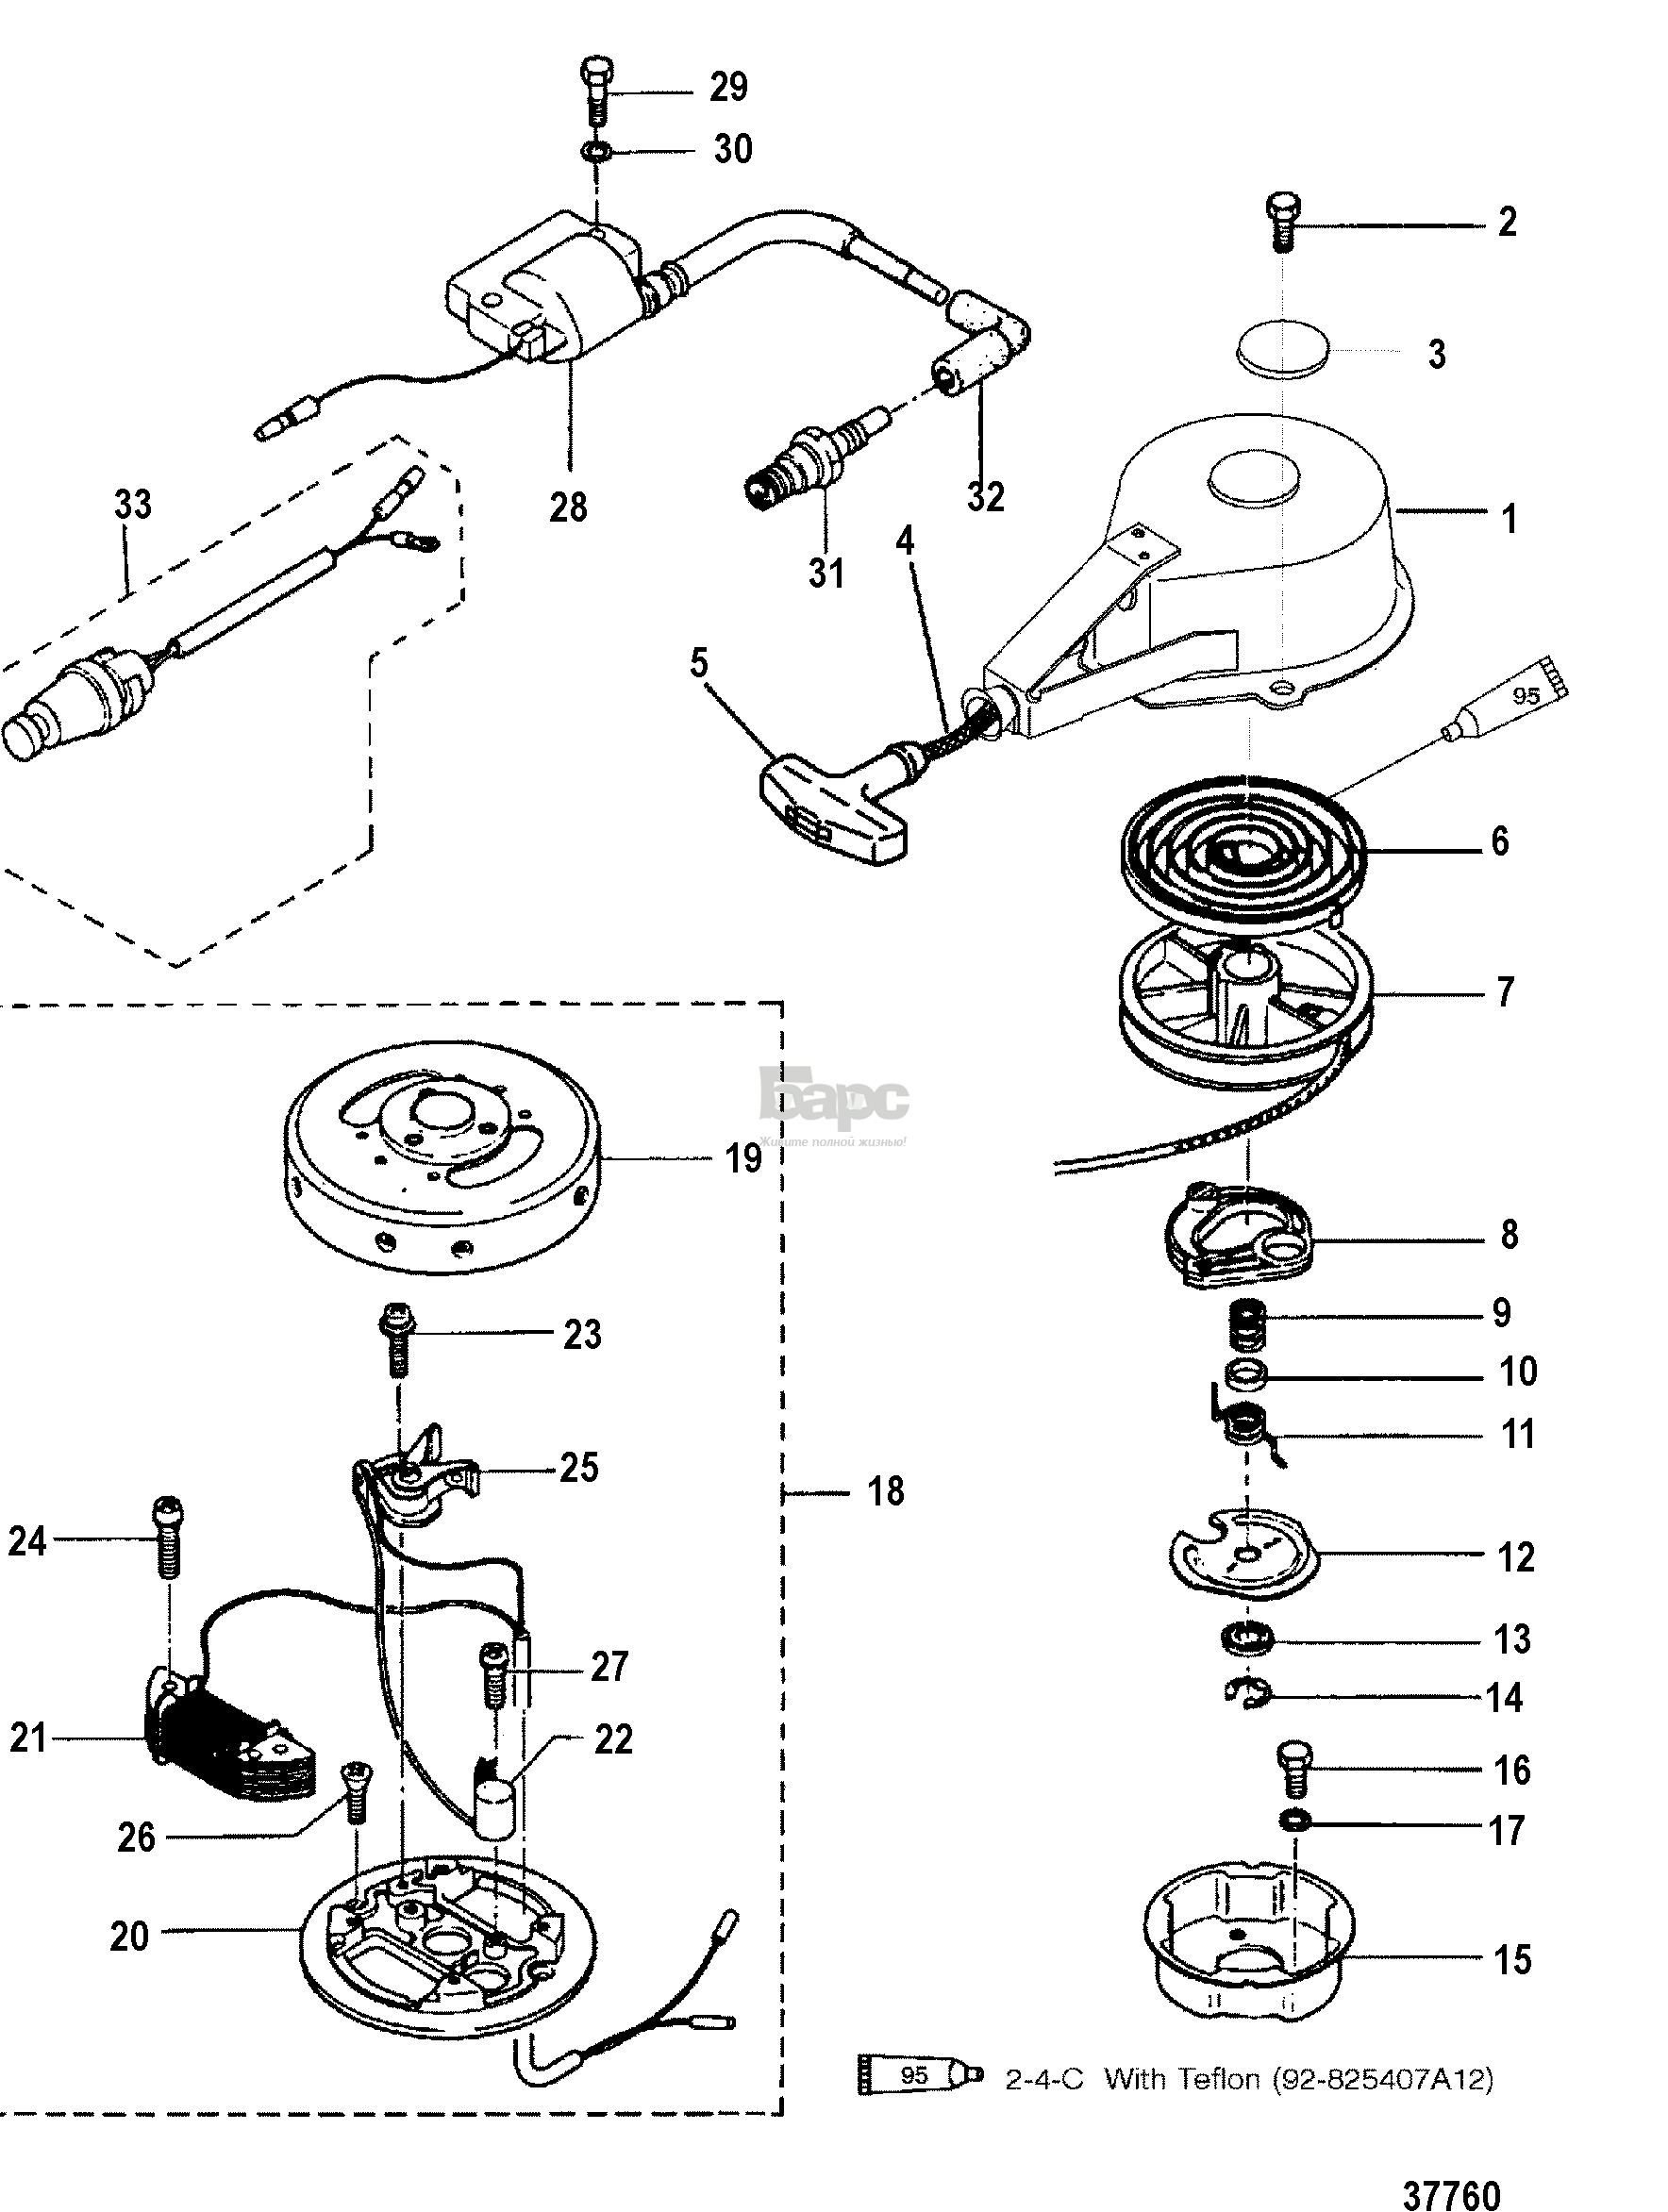 RECOIL AND IGNITION COMPONENTS(BREAKER POINT IGNITION)